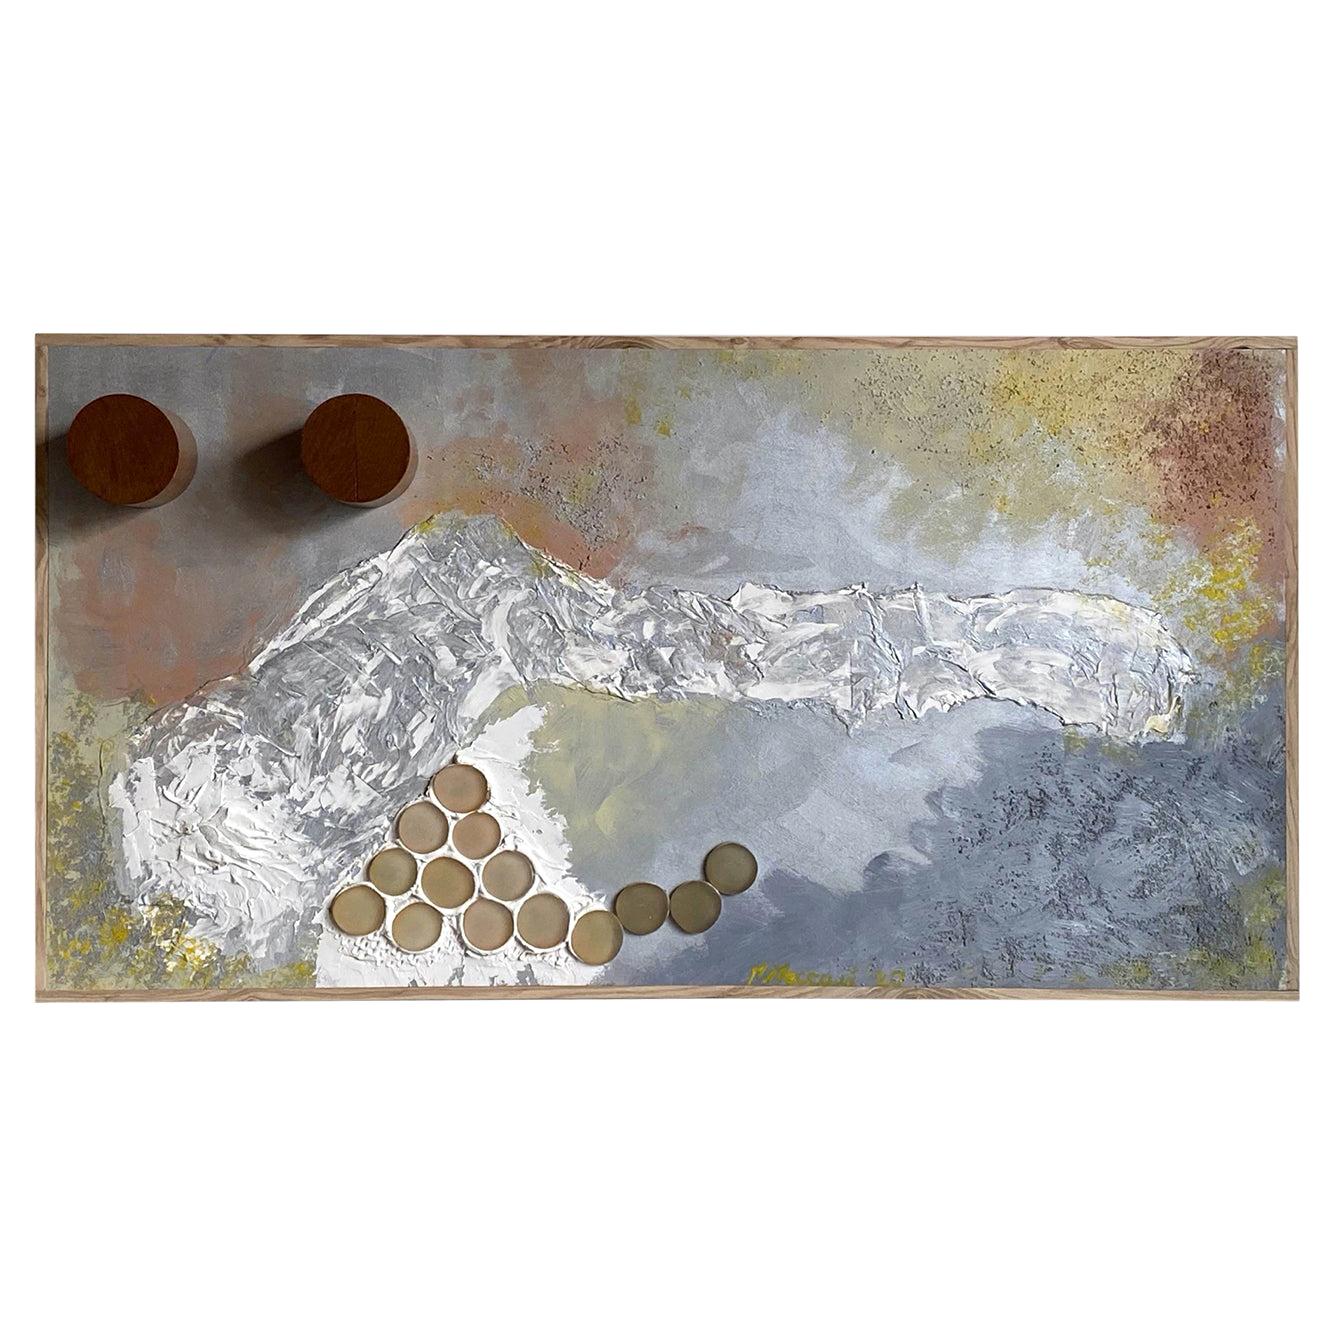 Tempesta Decorative Panel and Wall Hanger by Mascia Meccani For Sale